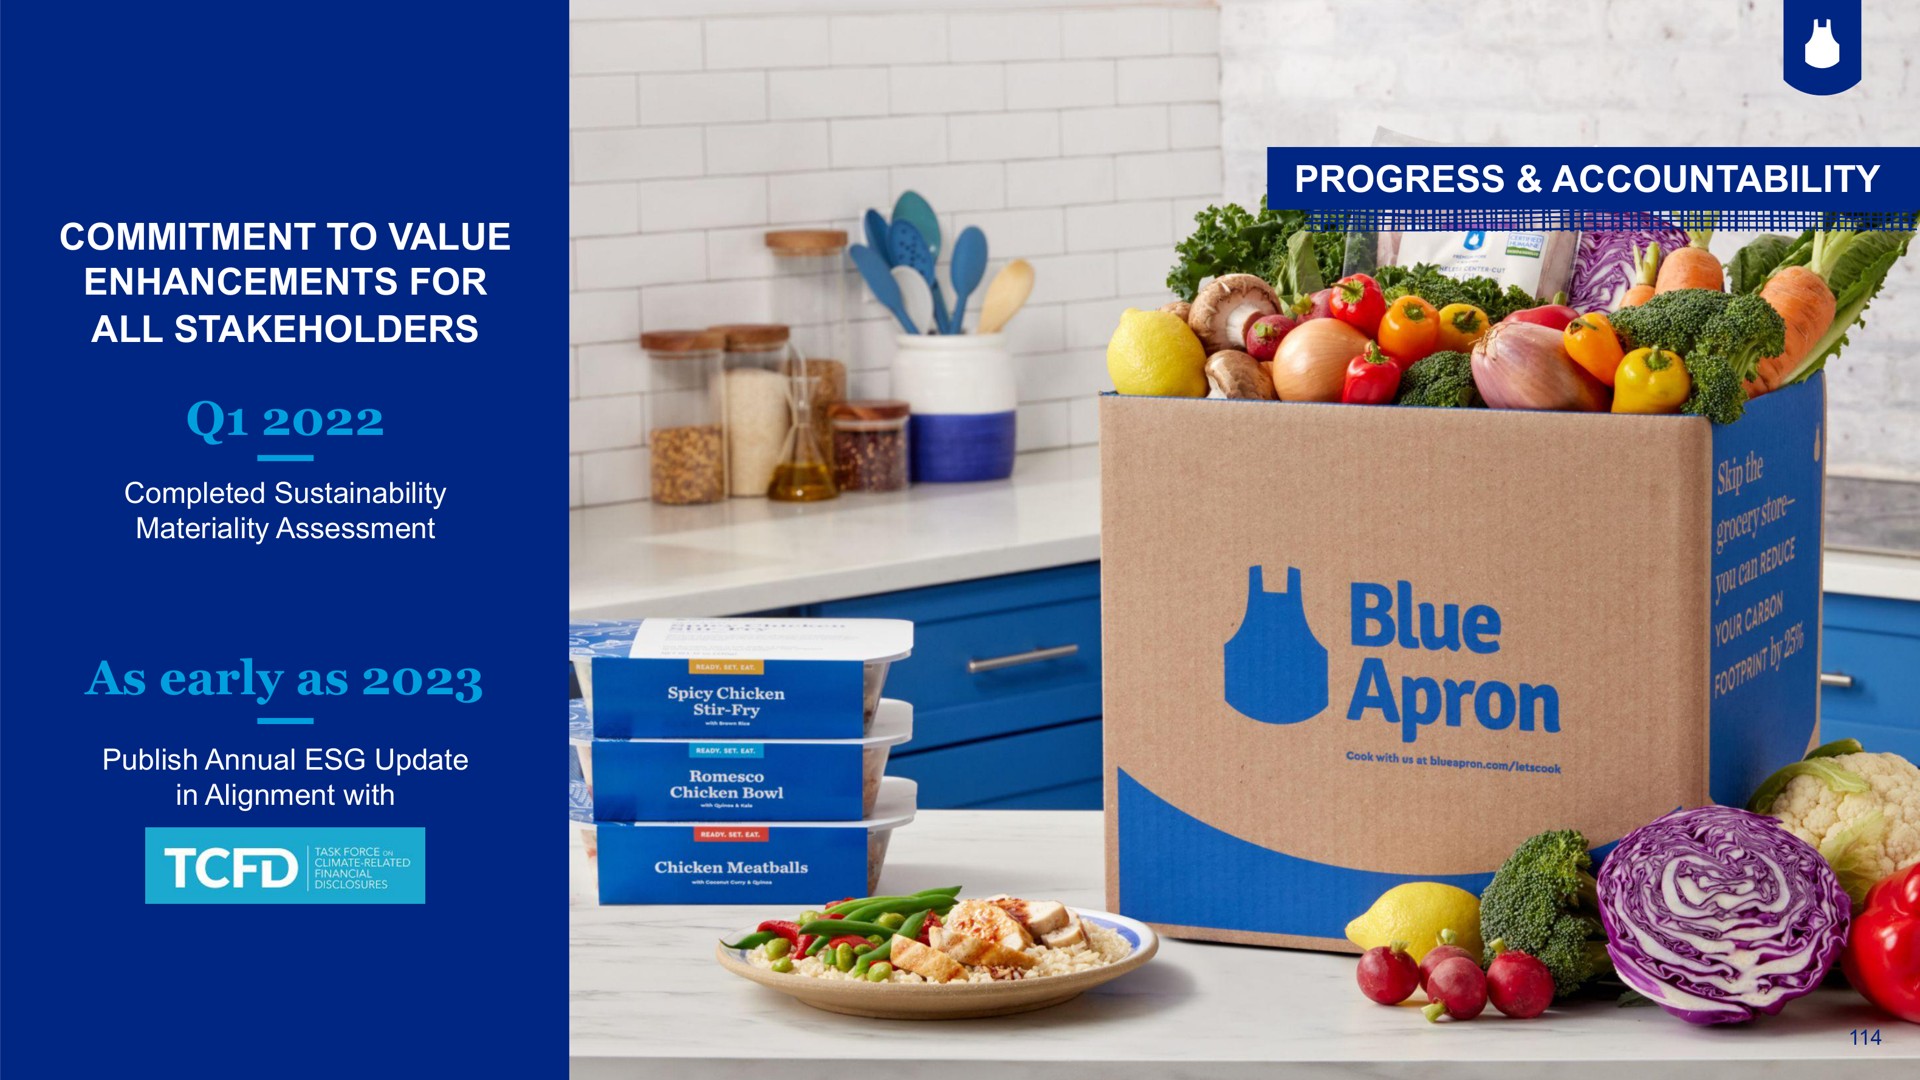 commitment to value enhancements for all stakeholders as early as progress accountability ere an blue apron | Blue Apron